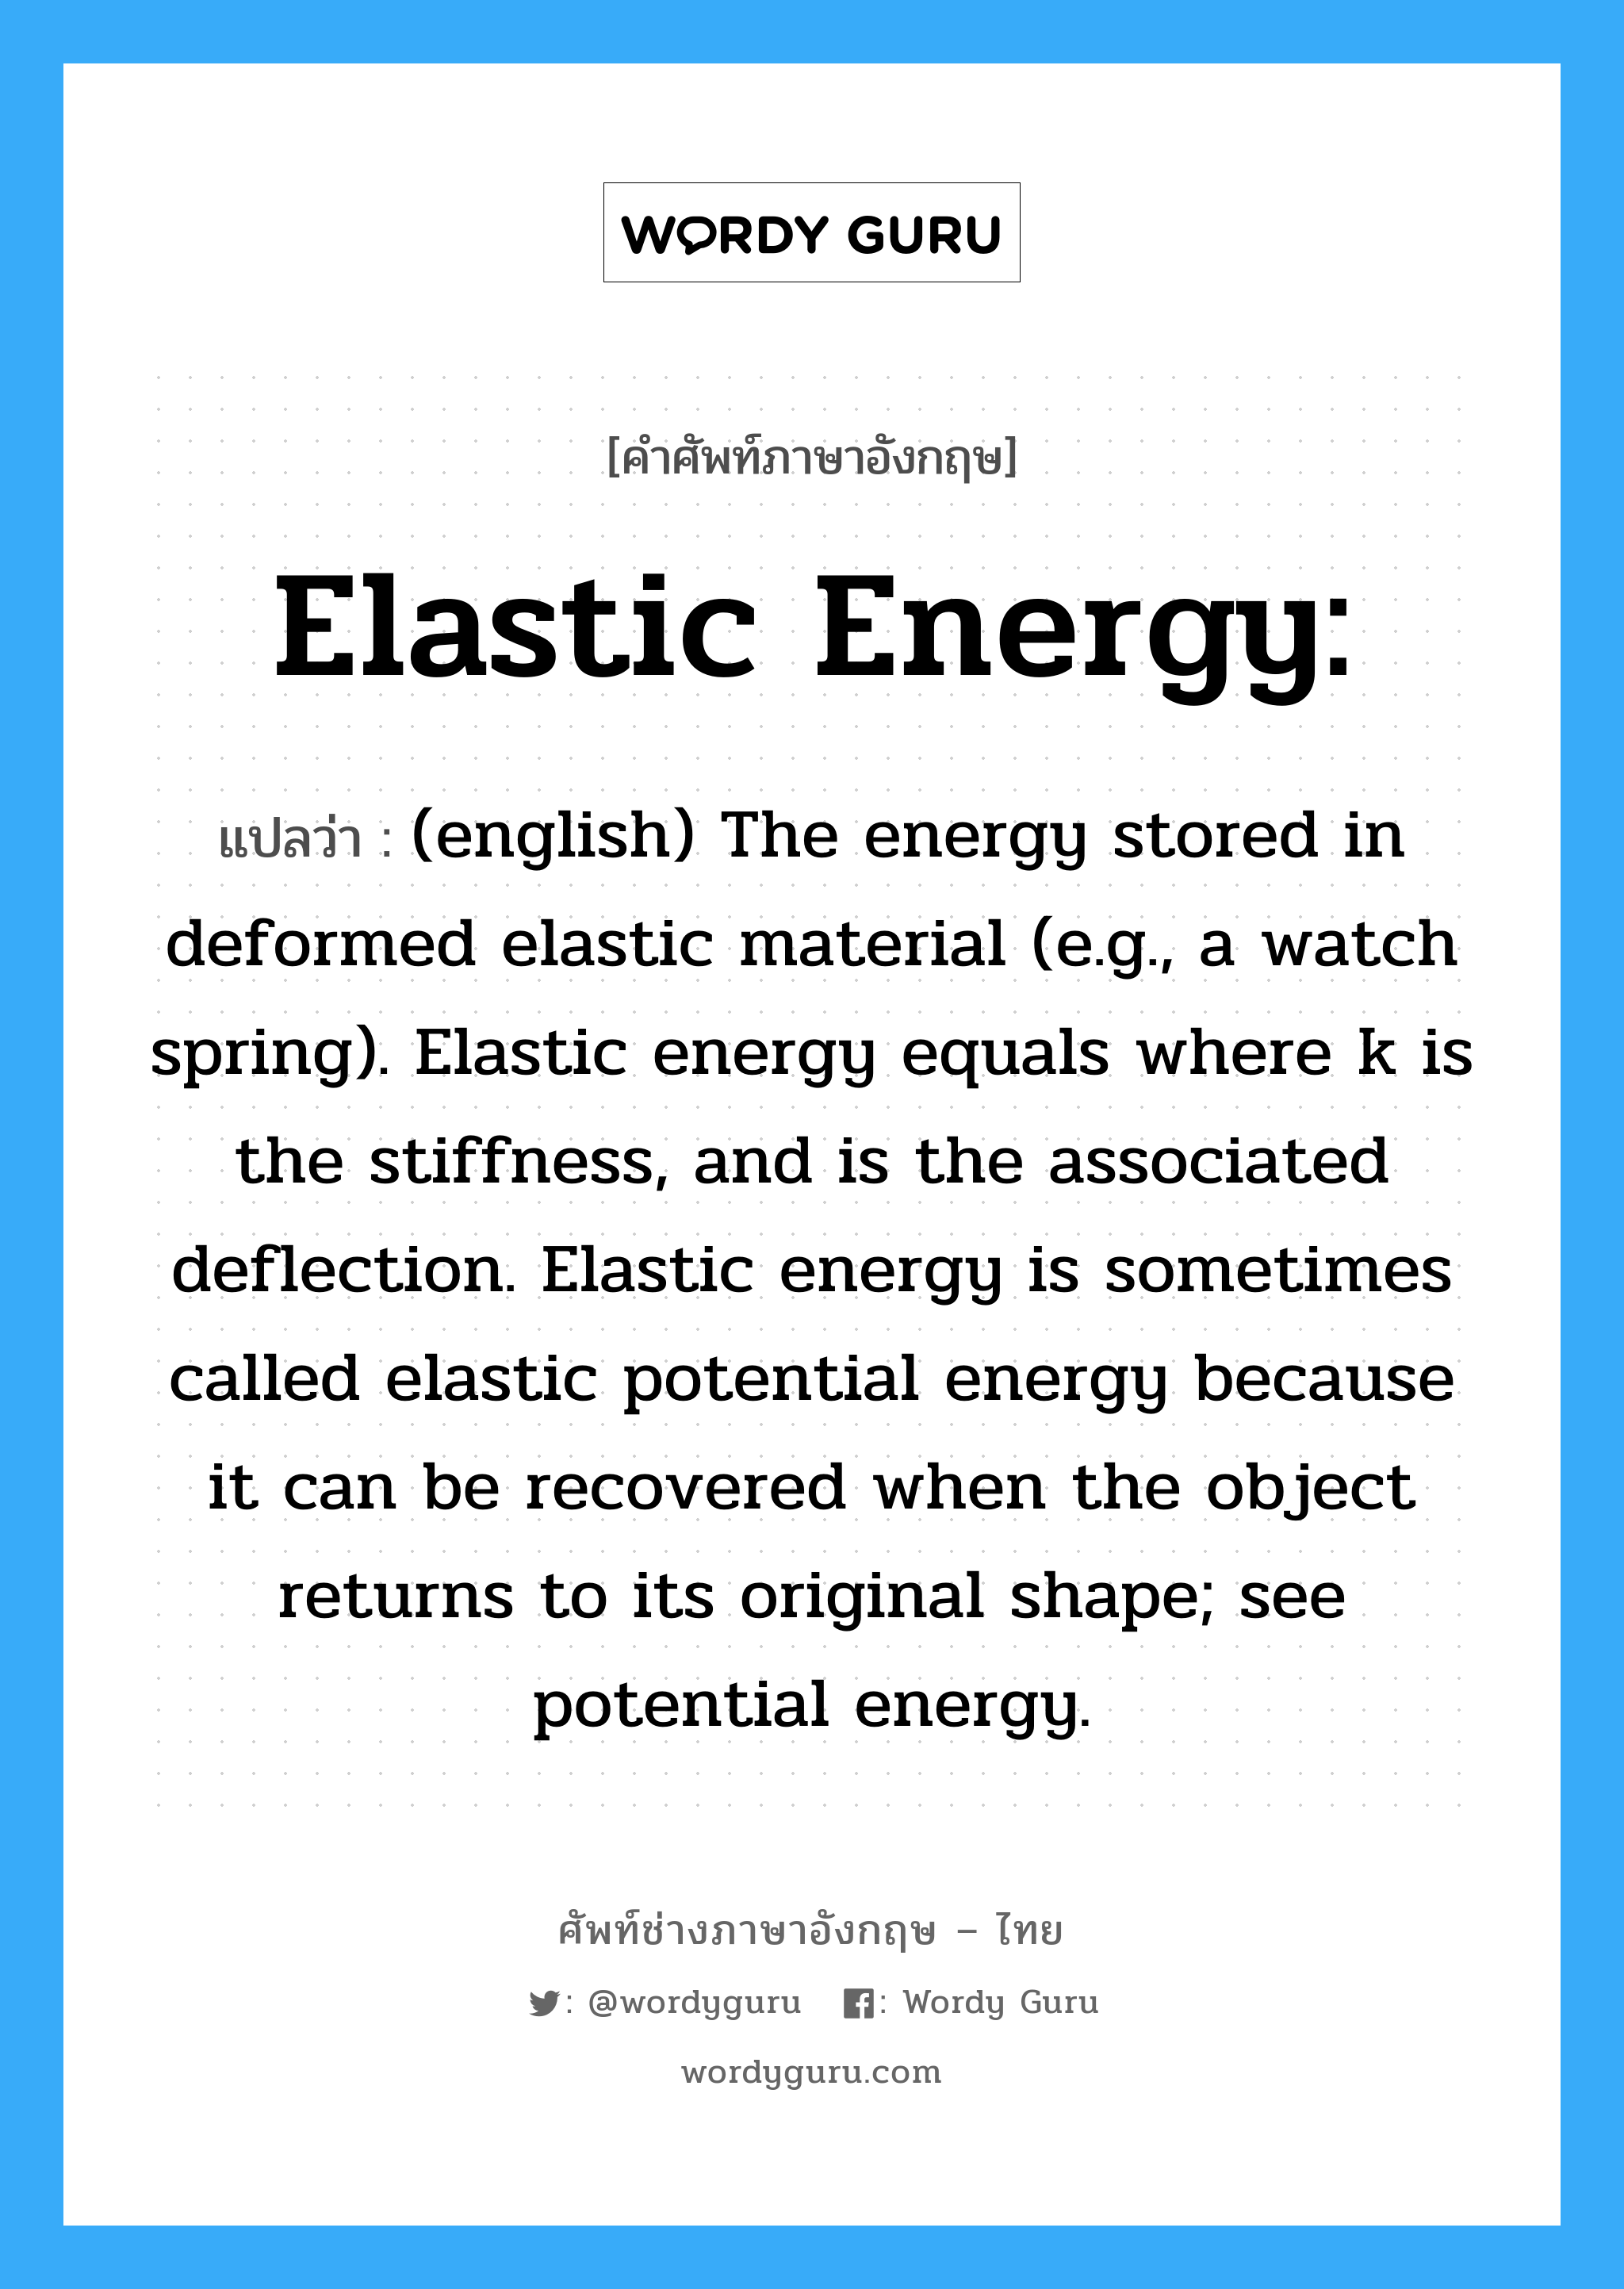 Elastic energy: แปลว่า?, คำศัพท์ช่างภาษาอังกฤษ - ไทย Elastic energy: คำศัพท์ภาษาอังกฤษ Elastic energy: แปลว่า (english) The energy stored in deformed elastic material (e.g., a watch spring). Elastic energy equals where k is the stiffness, and is the associated deflection. Elastic energy is sometimes called elastic potential energy because it can be recovered when the object returns to its original shape; see potential energy.